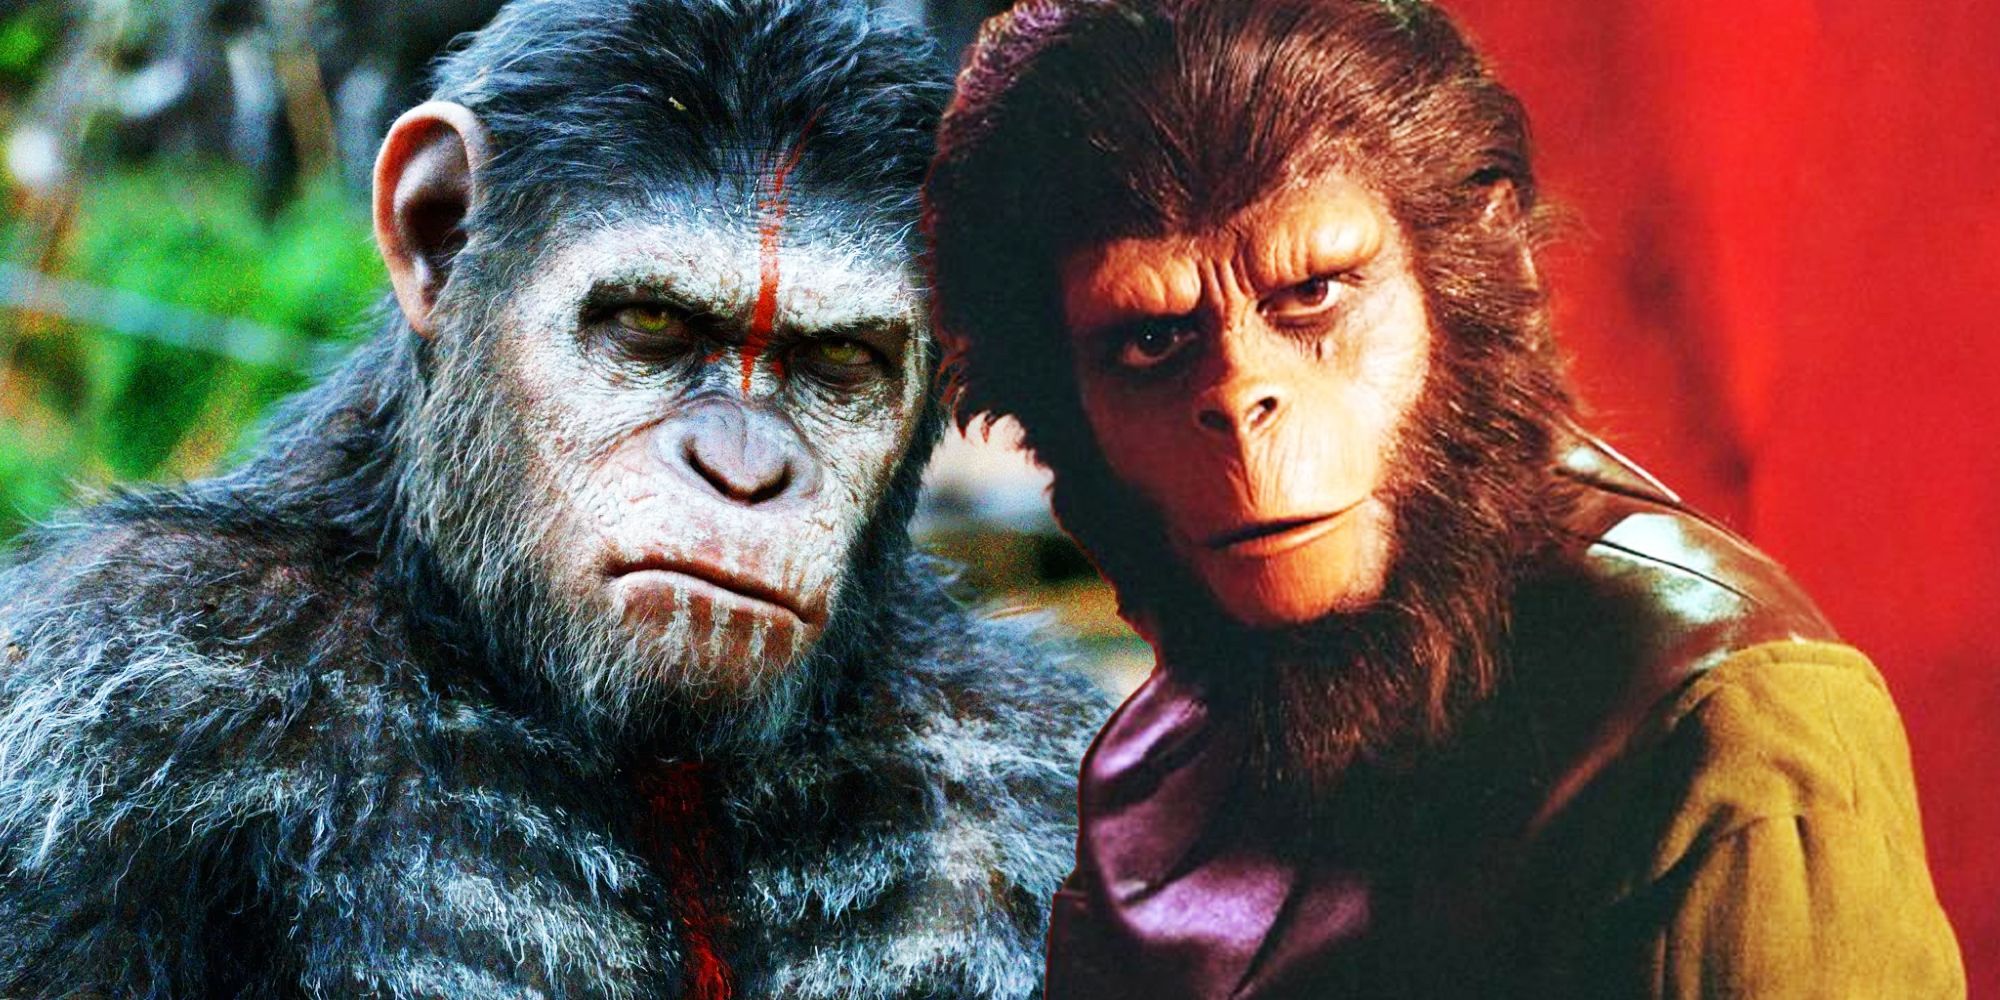 Of The Apes 4 Completely Flips The Original's Caesar Story